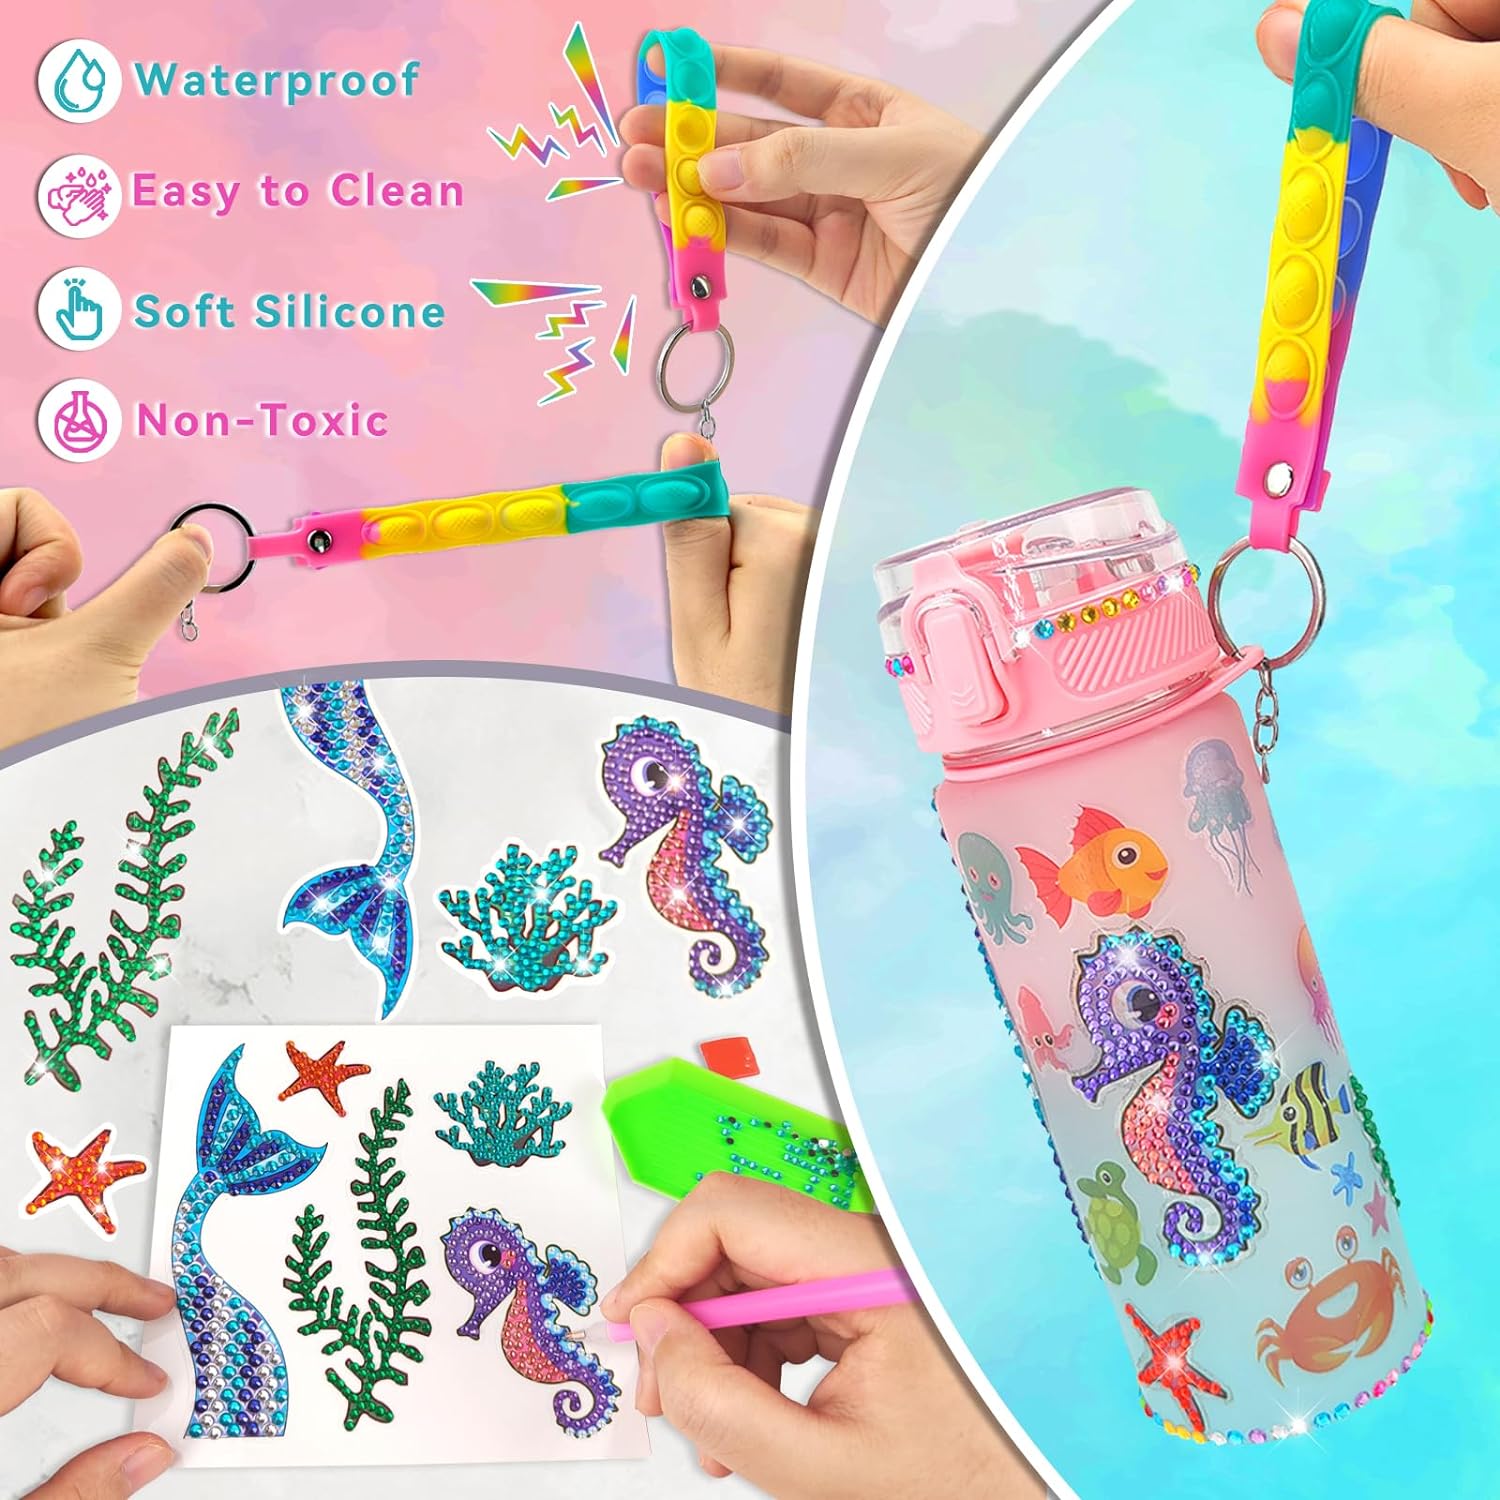 Decorate Your Own Water Bottle Kits,Mermaid Gem Diamond Painting Crafts